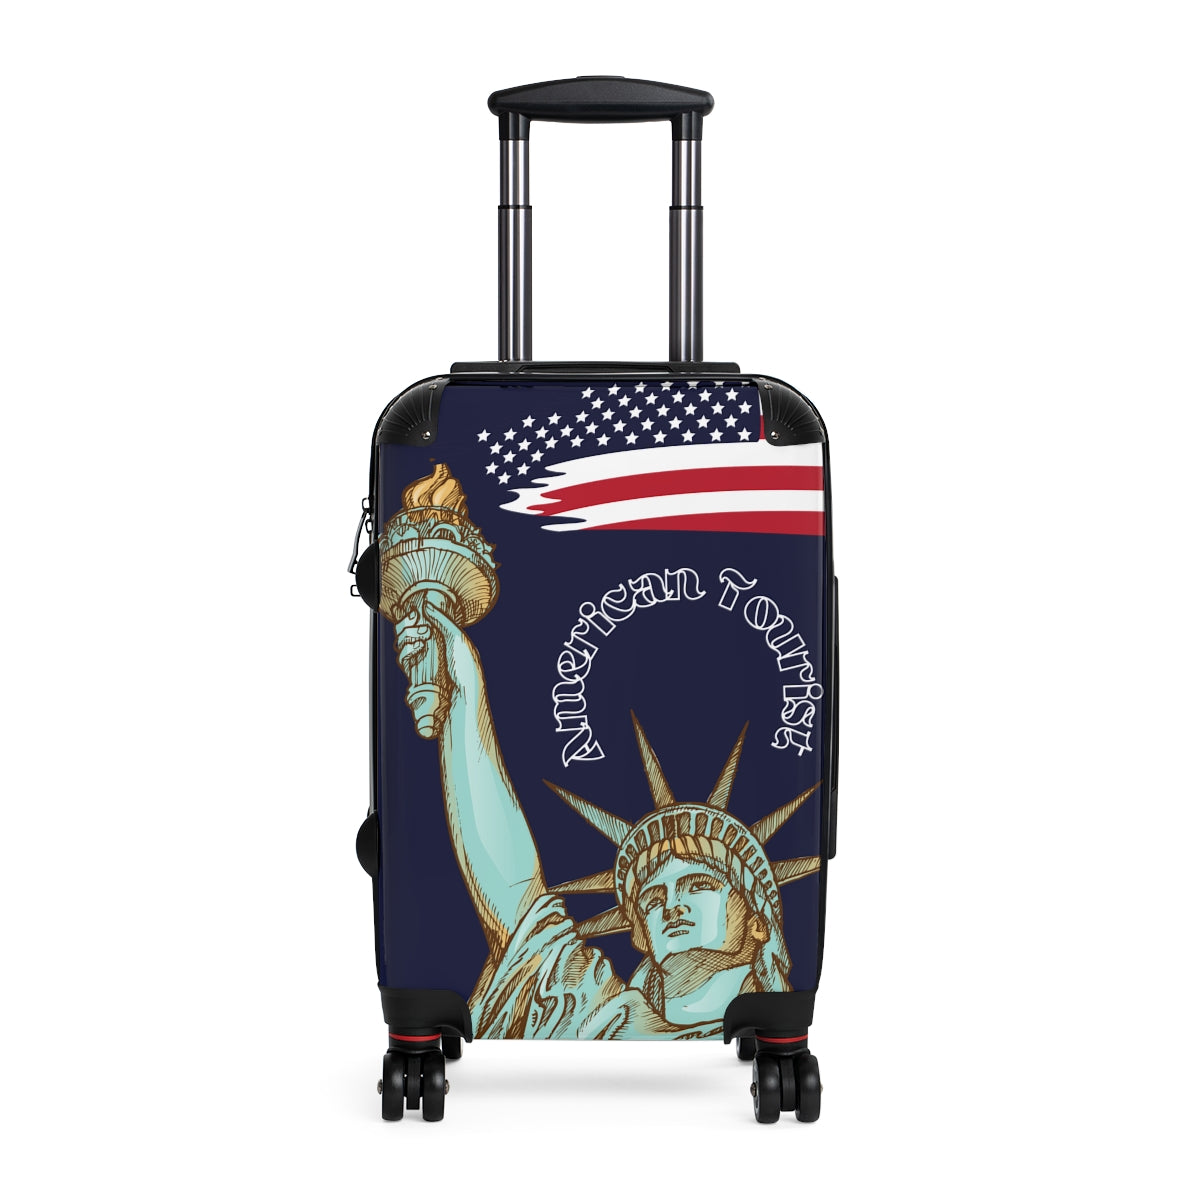 AMERICAN TOURIST SUITCASES, CARRY-ON SET, LUGGAGE FOR TOURIST, AMERICAN TOURIST